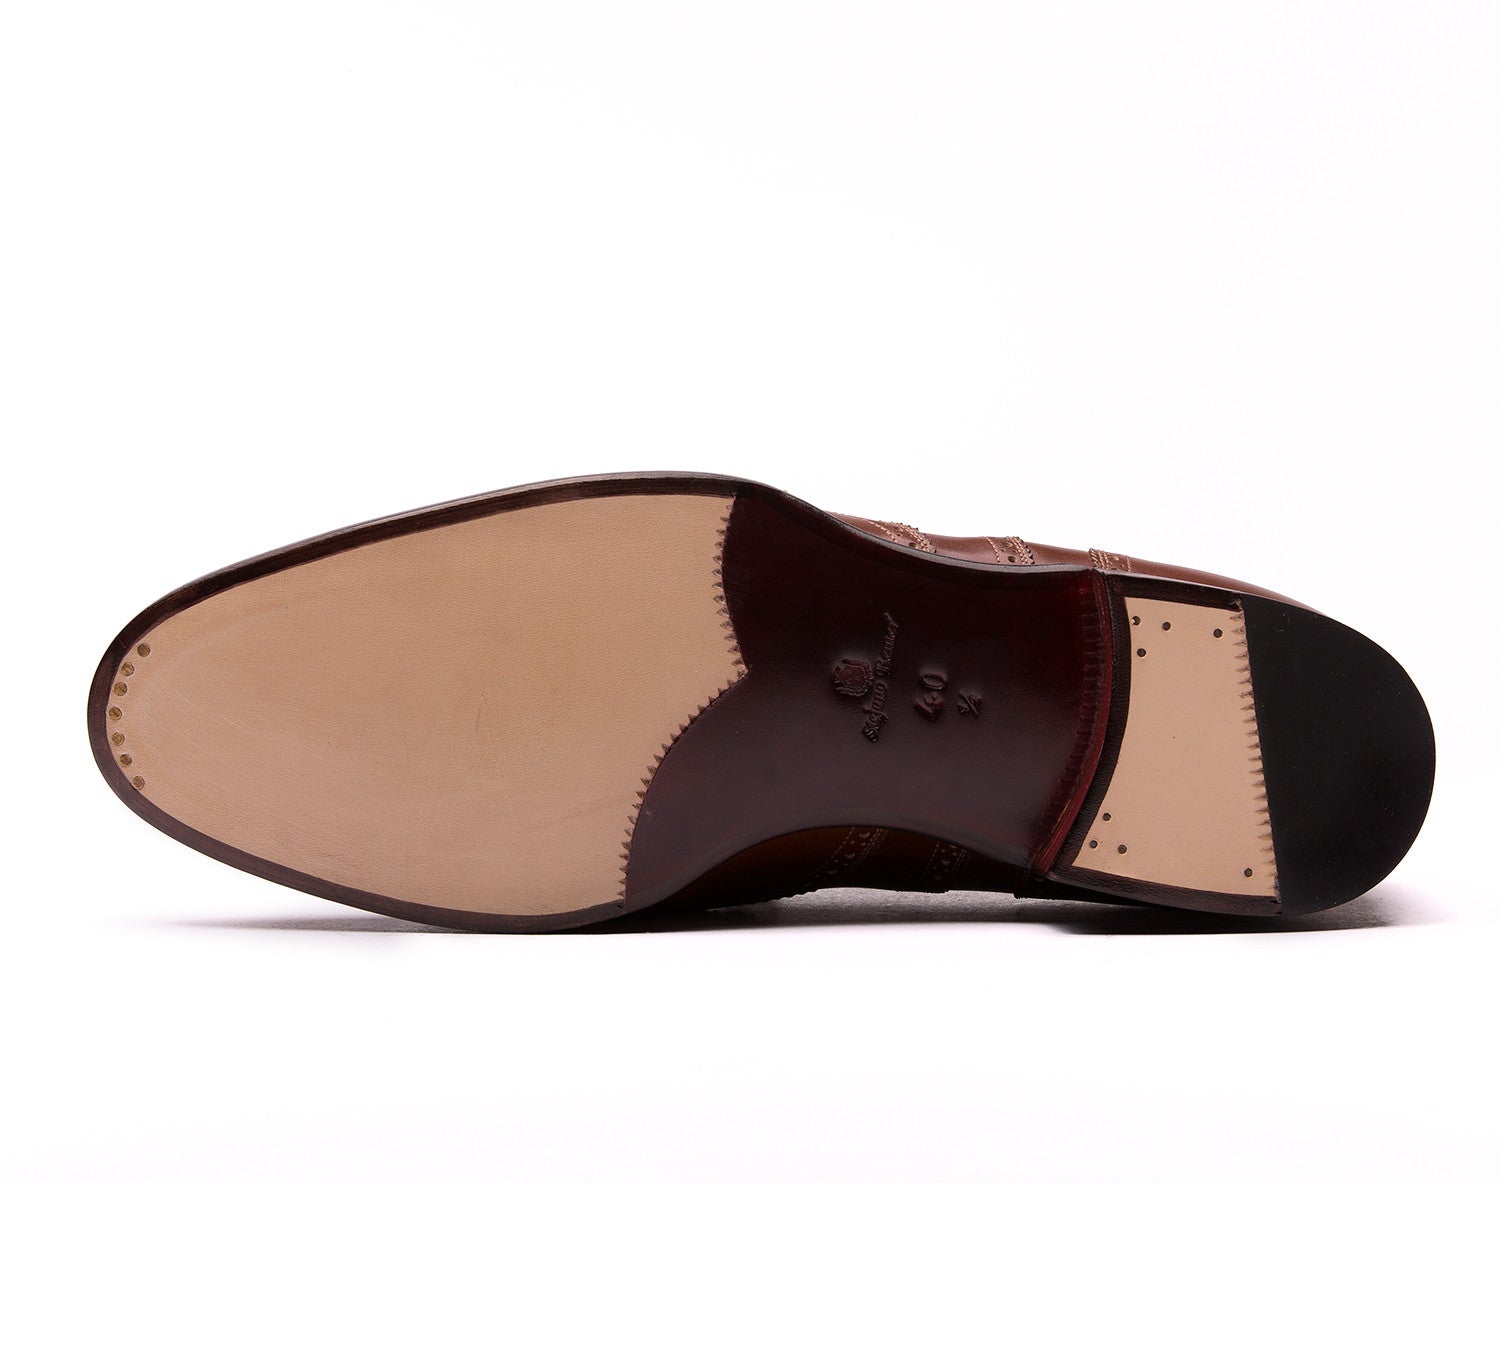 Stefano Bemer Style 6240 - Brown Calf - Sole View